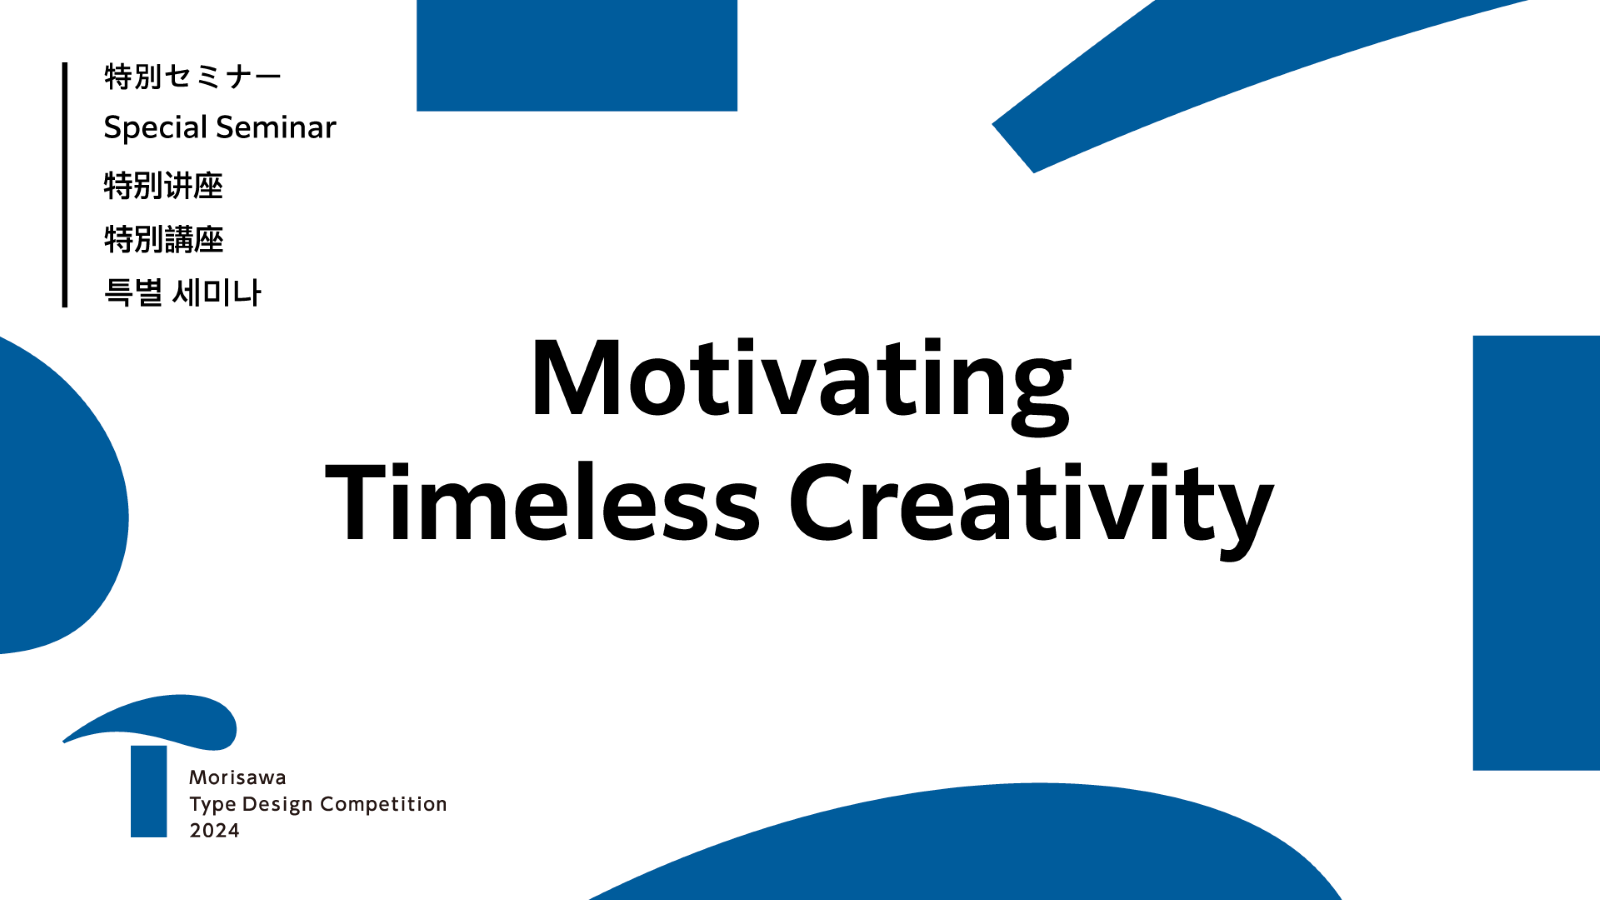 Online Special Seminar “Motivating Timeless Creativity” Now Available